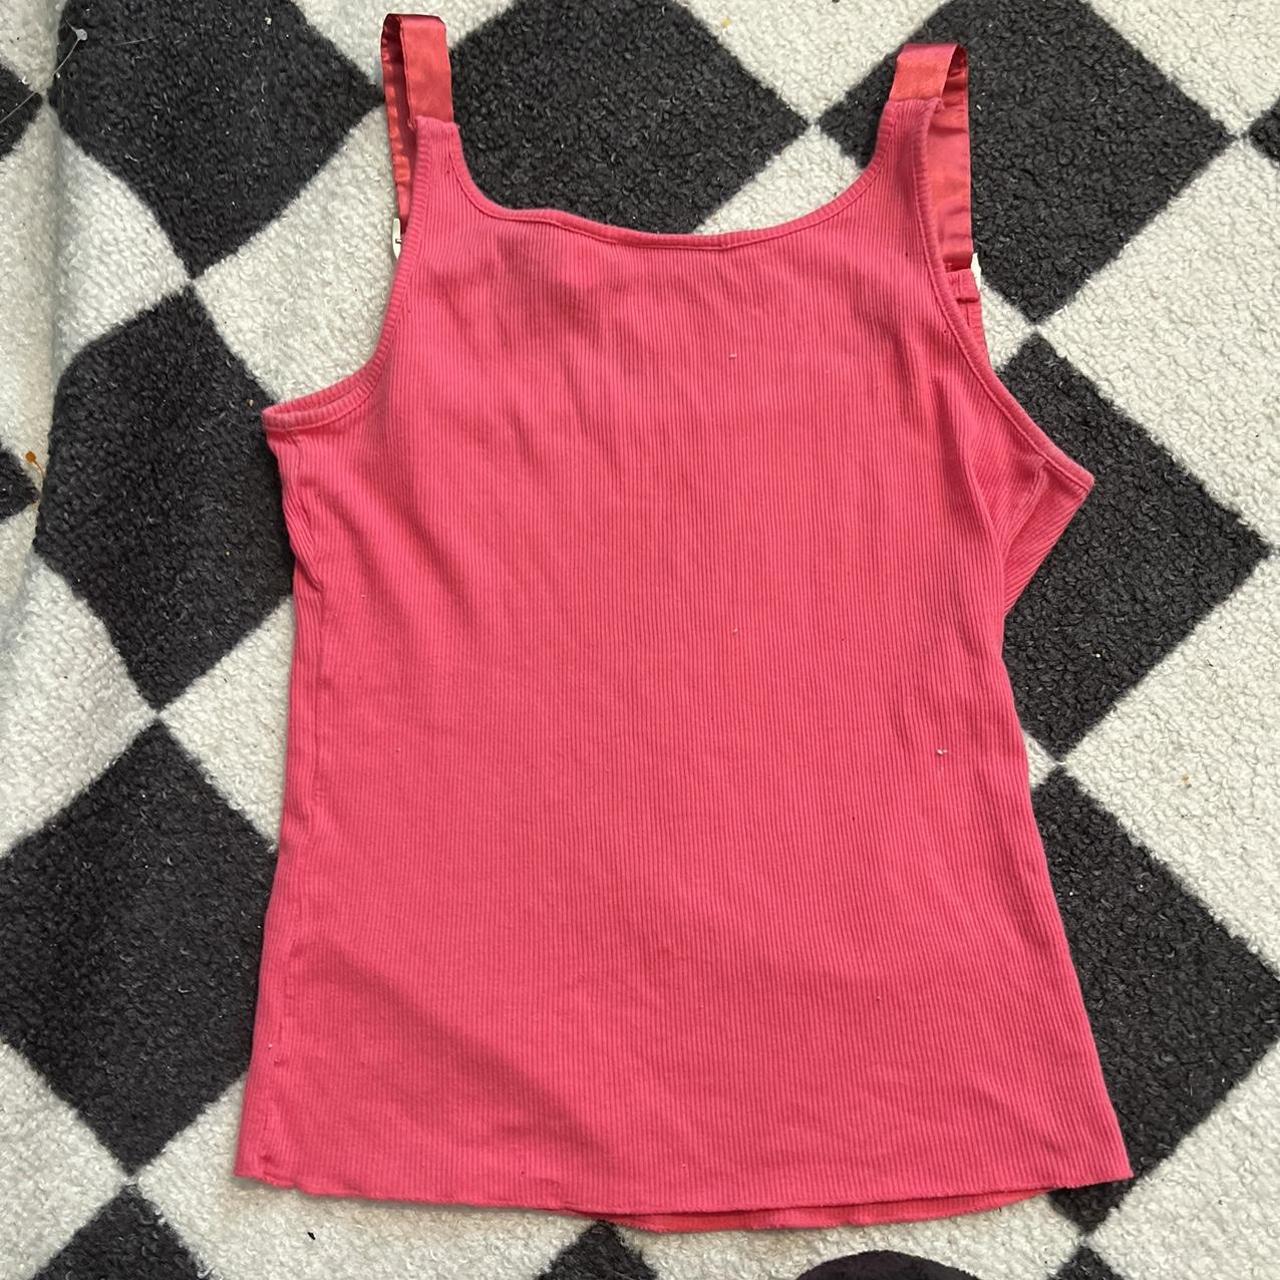 DKNY Women's Pink and Silver Vest (3)